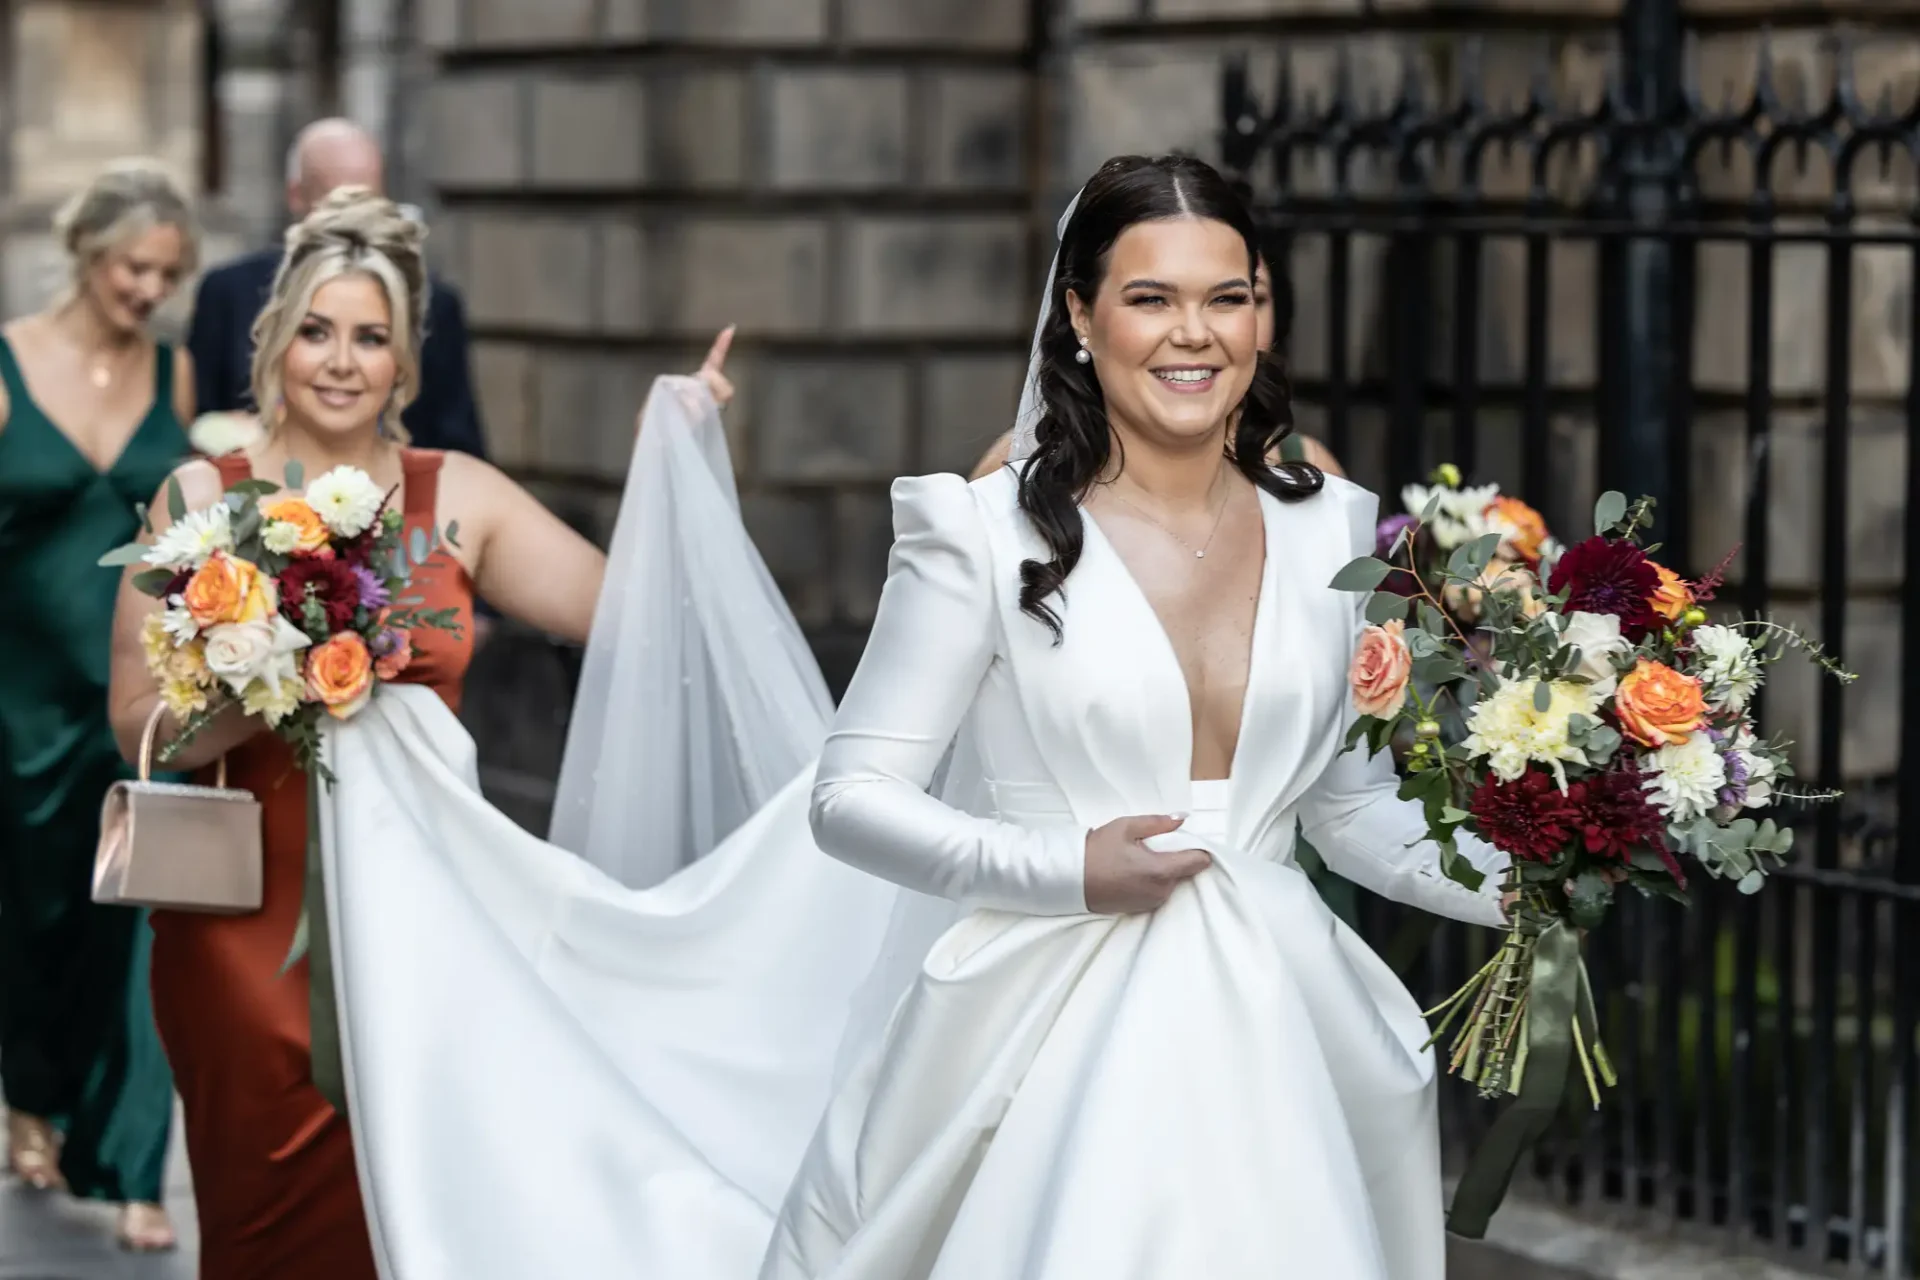 A radiant bride with a bouquet smiling as she walks, accompanied by two bridesmaids holding her dress train.